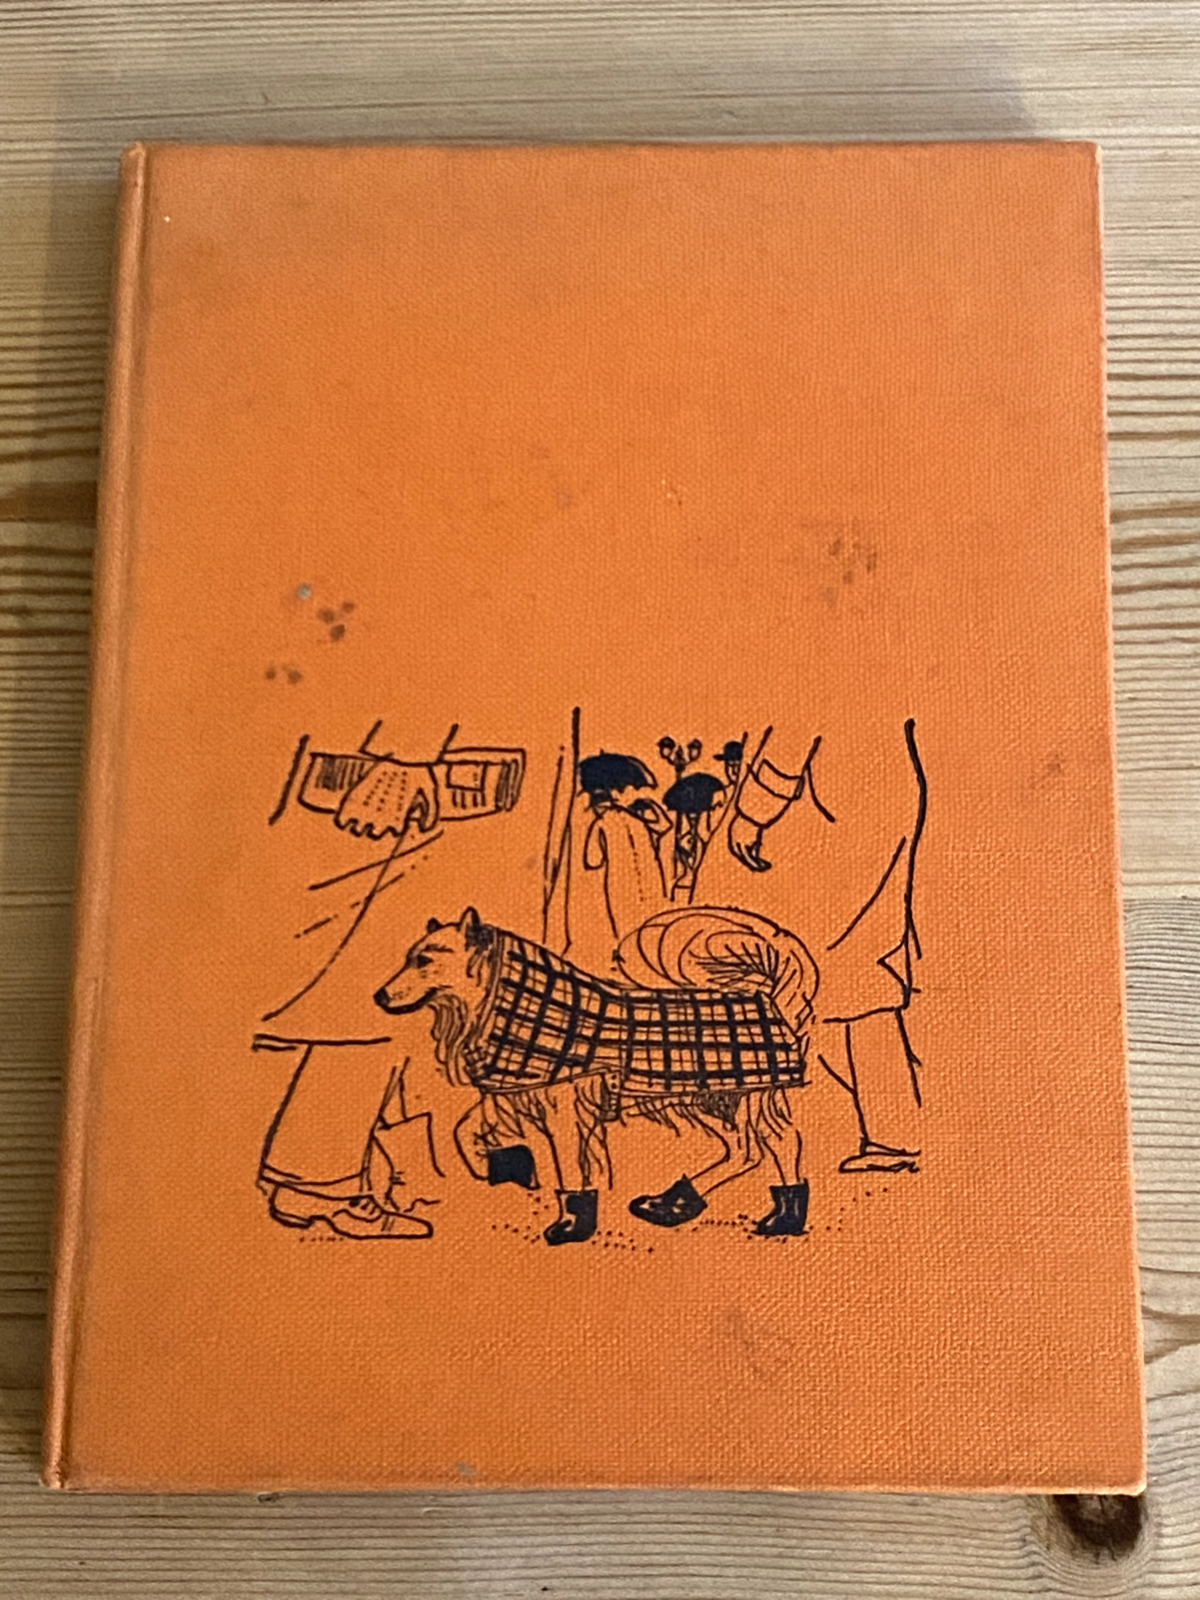 Rare Chow Chow Dog Story Book By Barnsley 1st 1957 Illustrated By Bruce Petty